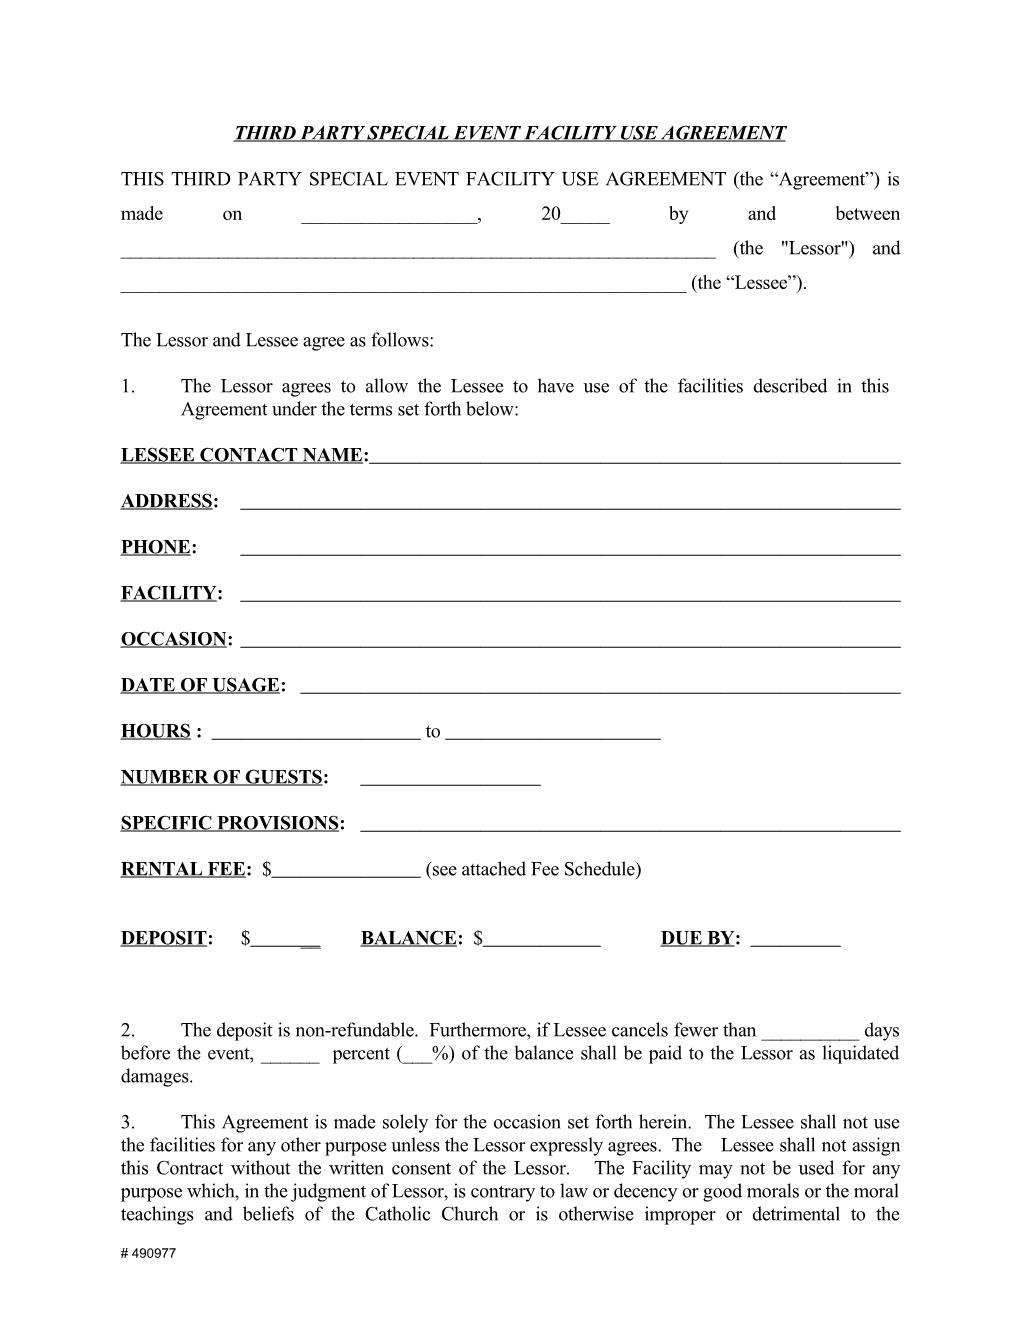 Third Party Special Event Facility Use Agreement